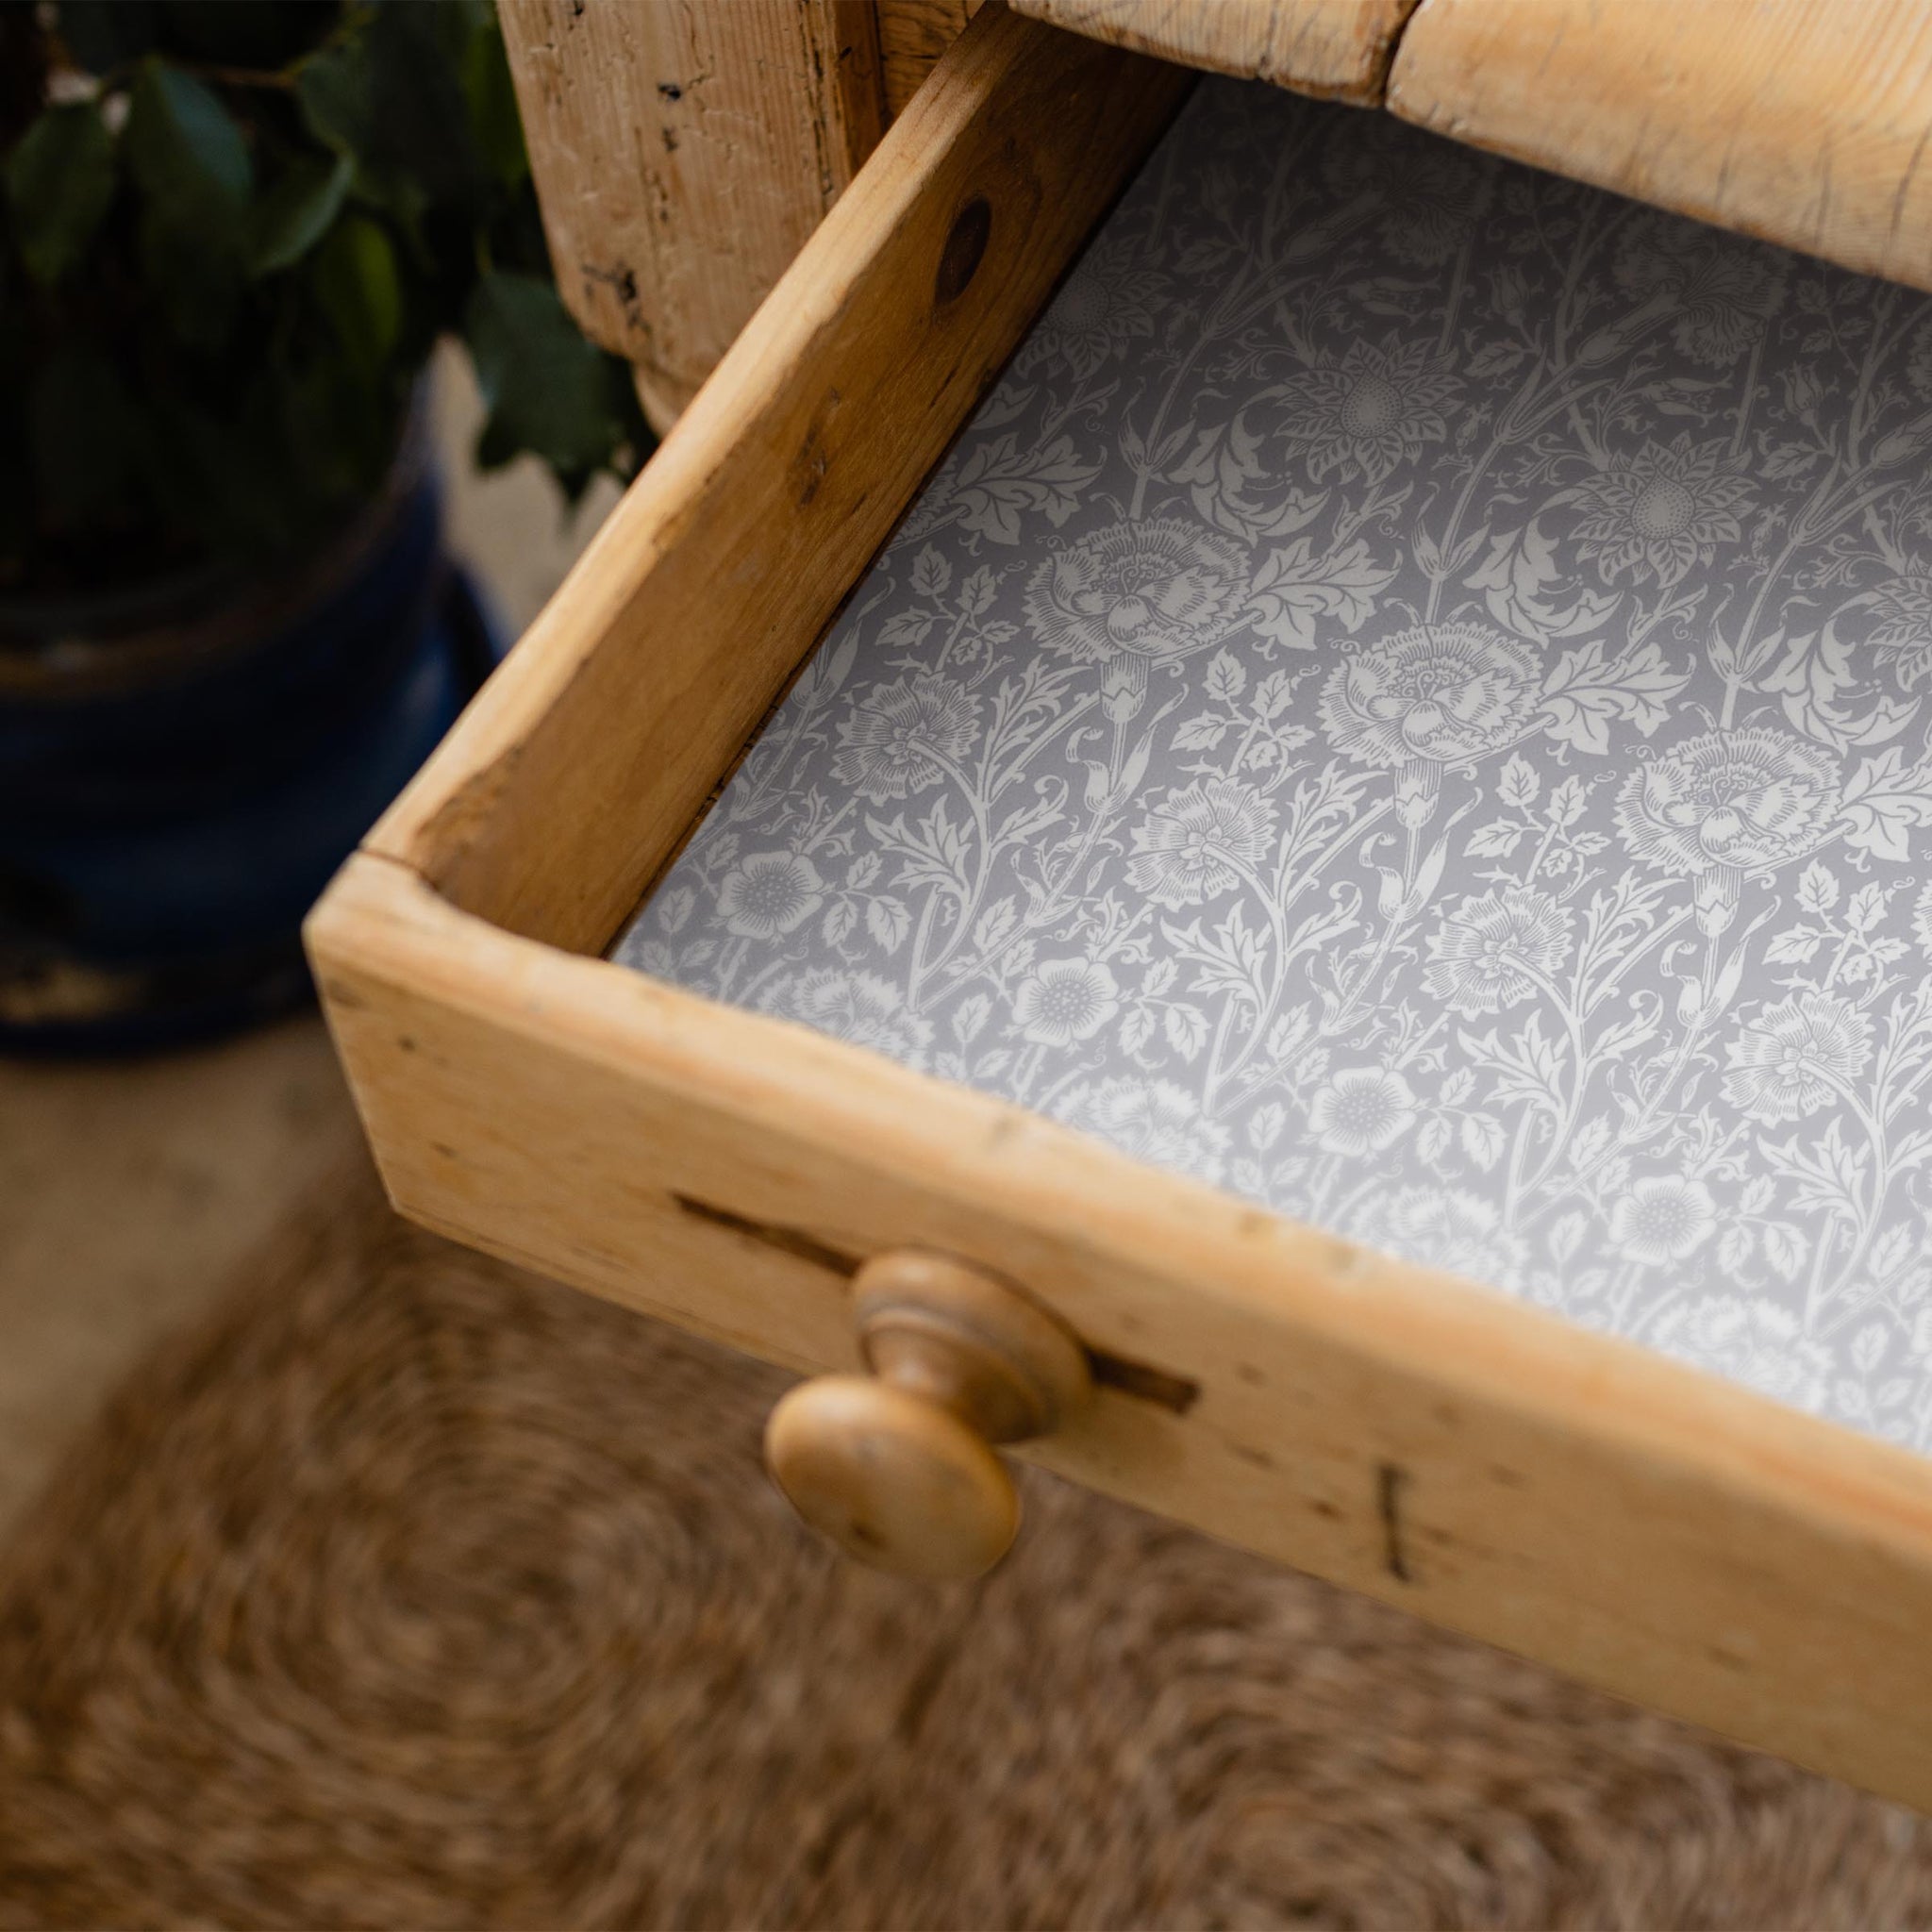 LILY OF THE VALLEY fragrance SCENTED Drawer Liners in GREY William Morris Design